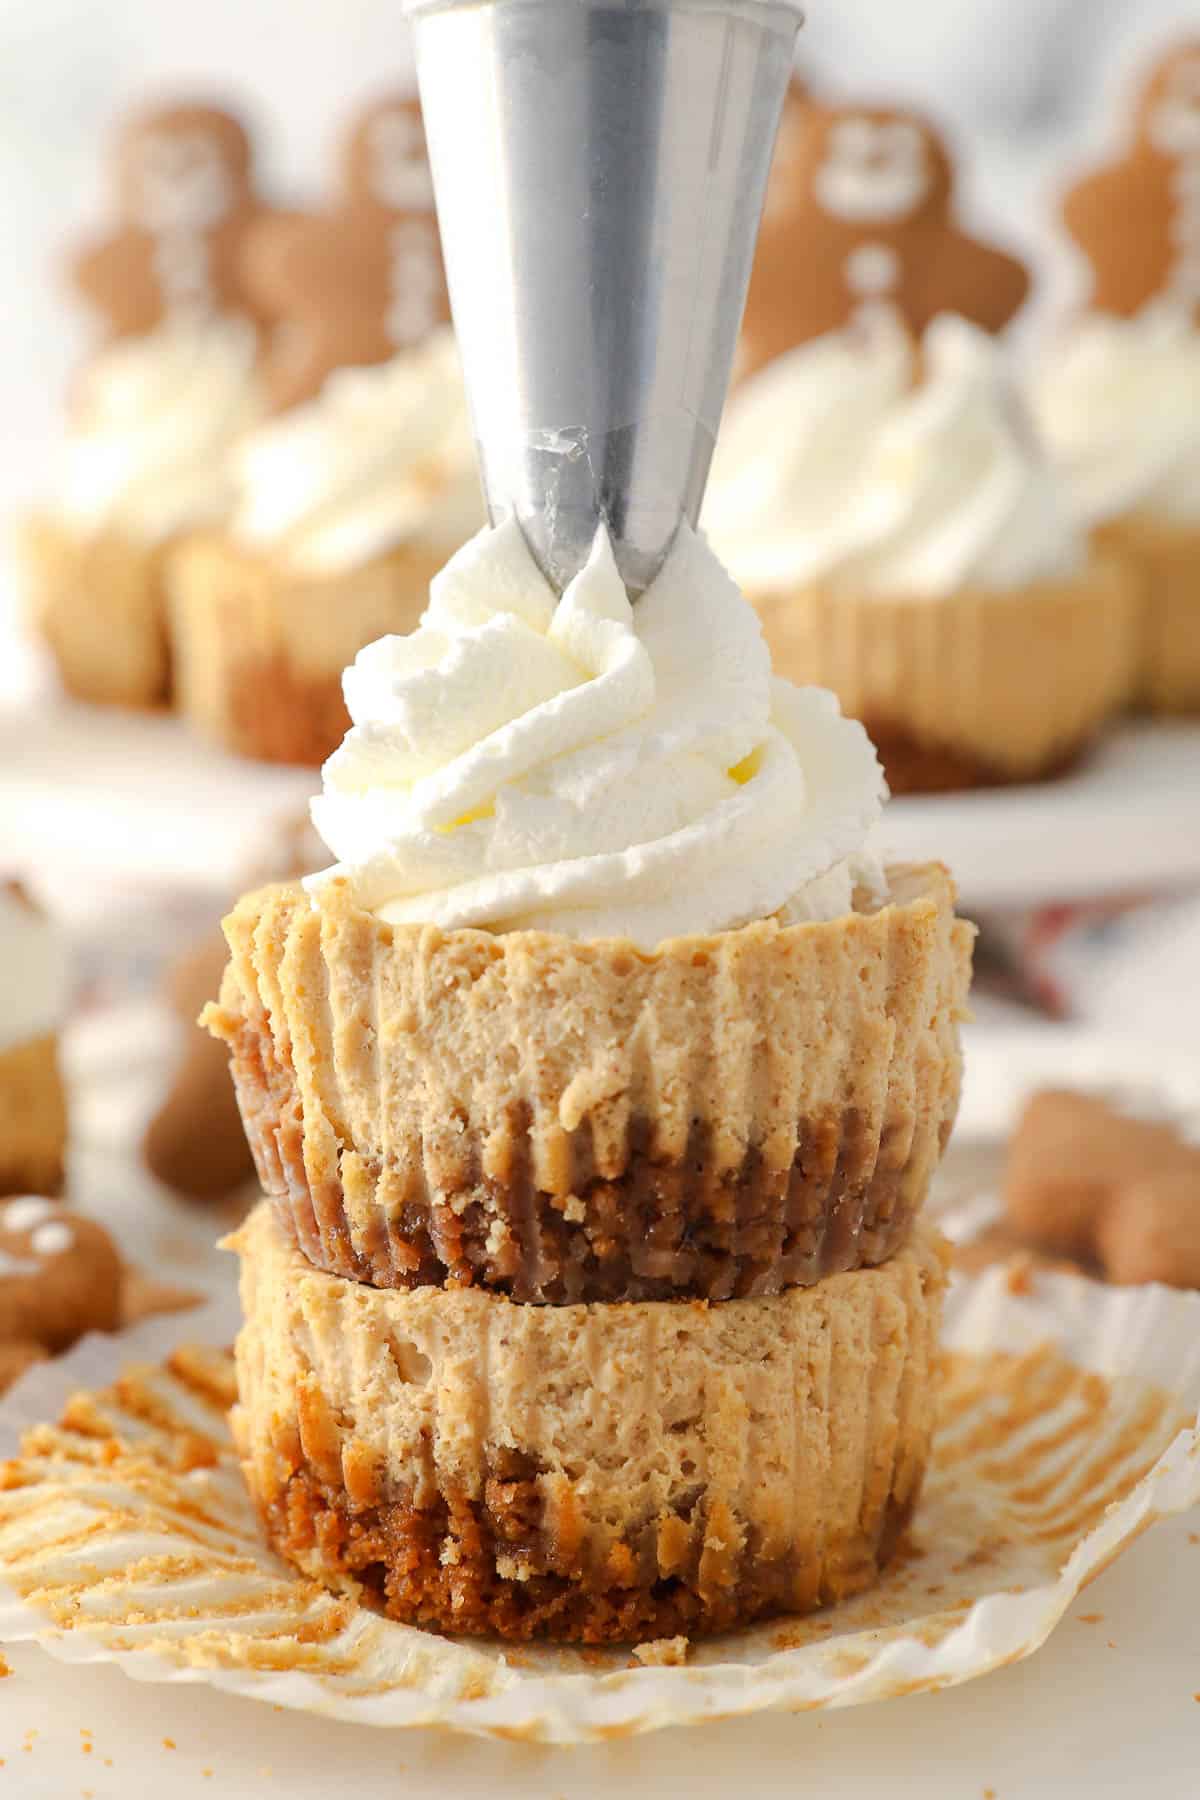 Whipped cream being piped on top of a stack of Gingerbread cheesecakes